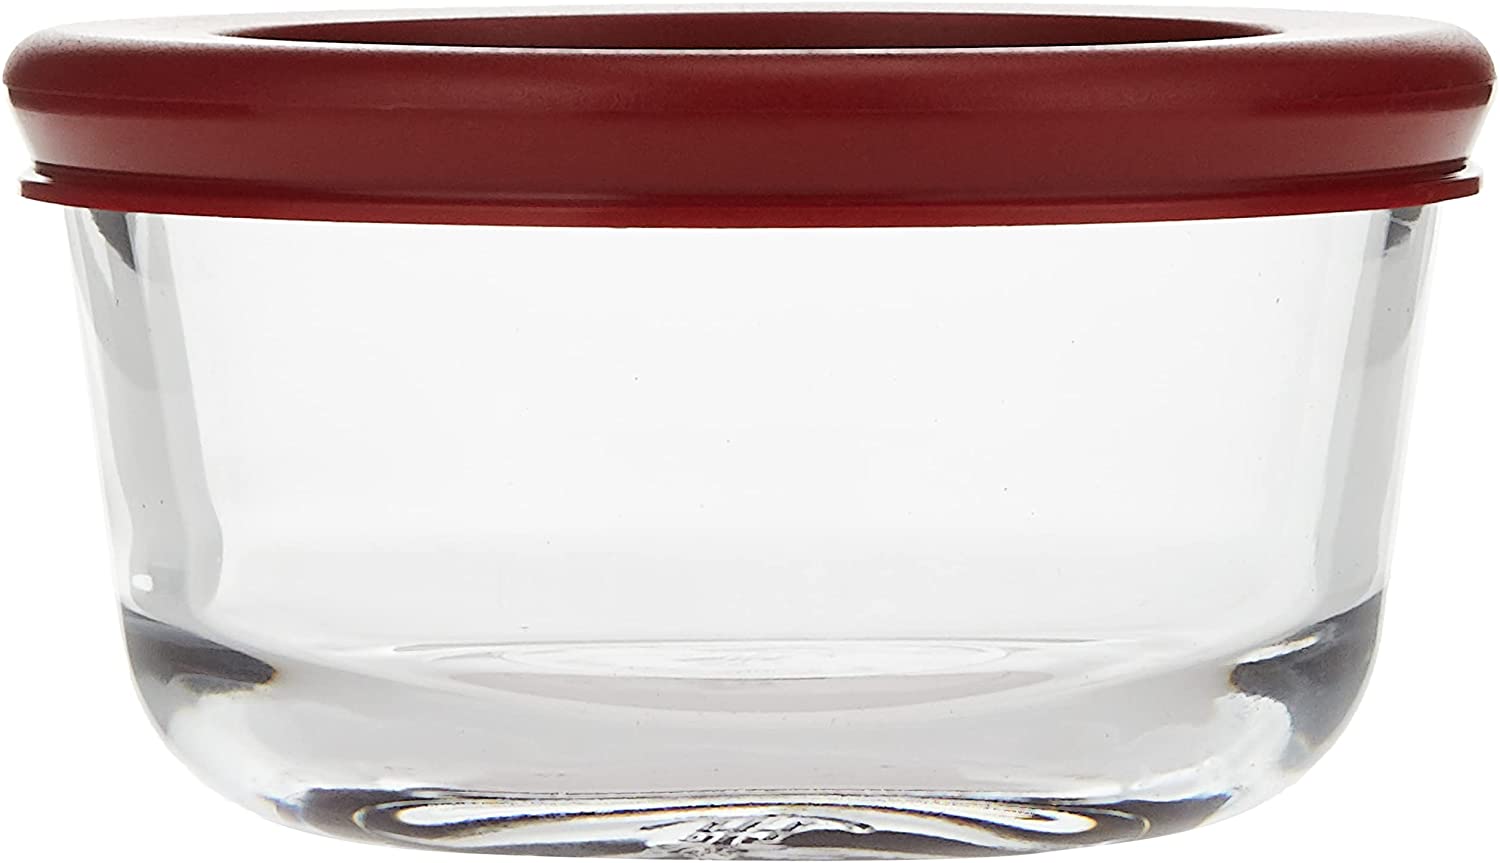 Anchor Hocking Classic Glass Food Storage Container with Lid, Red, 6 Cup